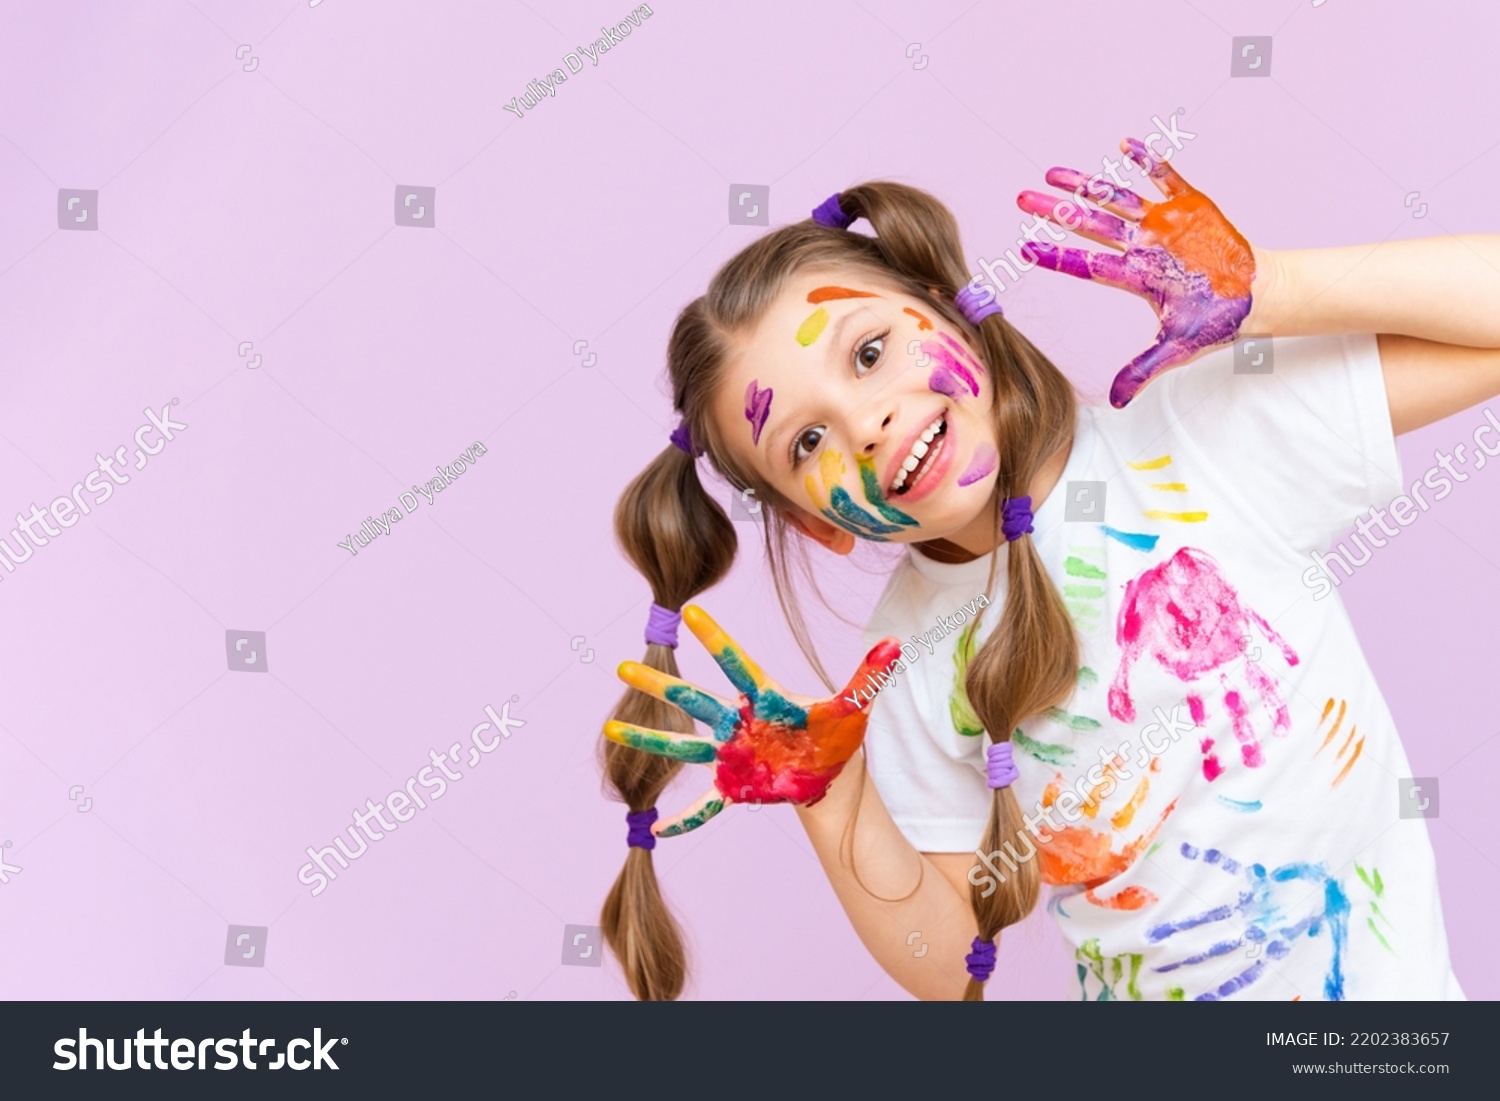 A beautiful little girl stained in multicolored paints on a pink isolated background has fun smiling. #2202383657